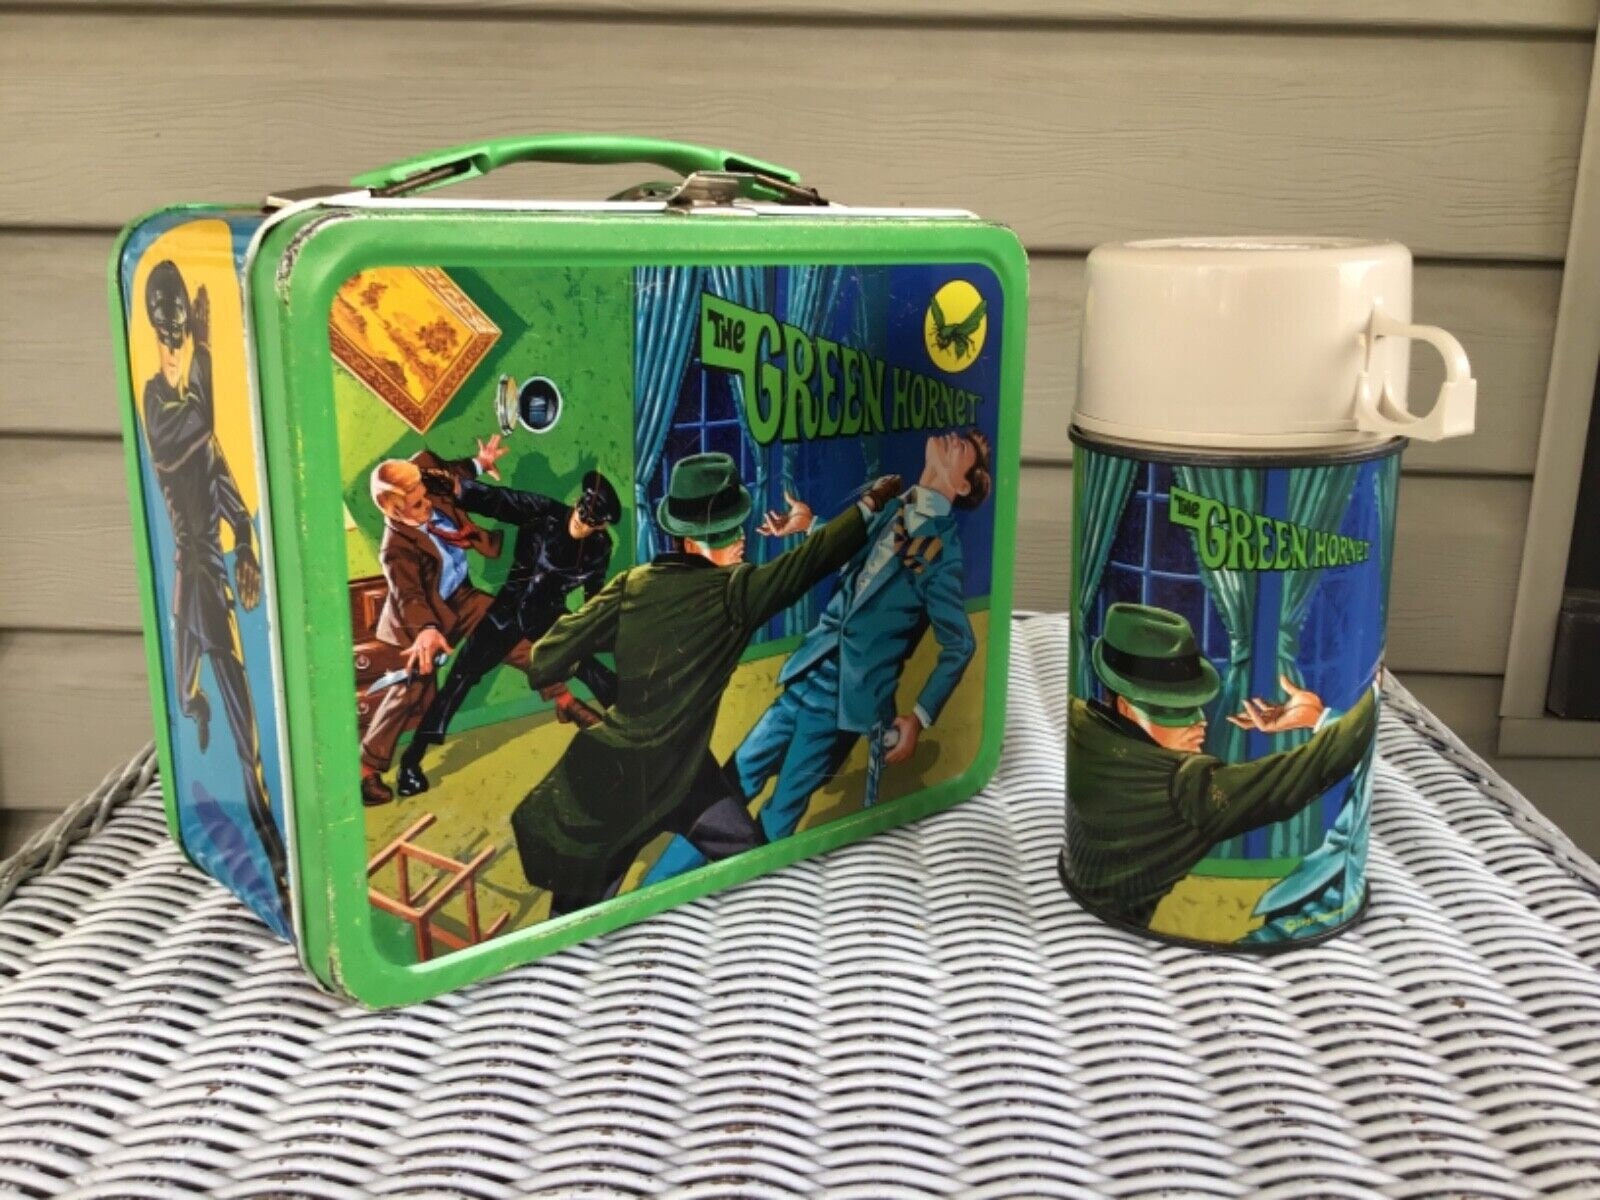 1967 Thermos The Green Hornet Lunch Box with Thermos (1A)